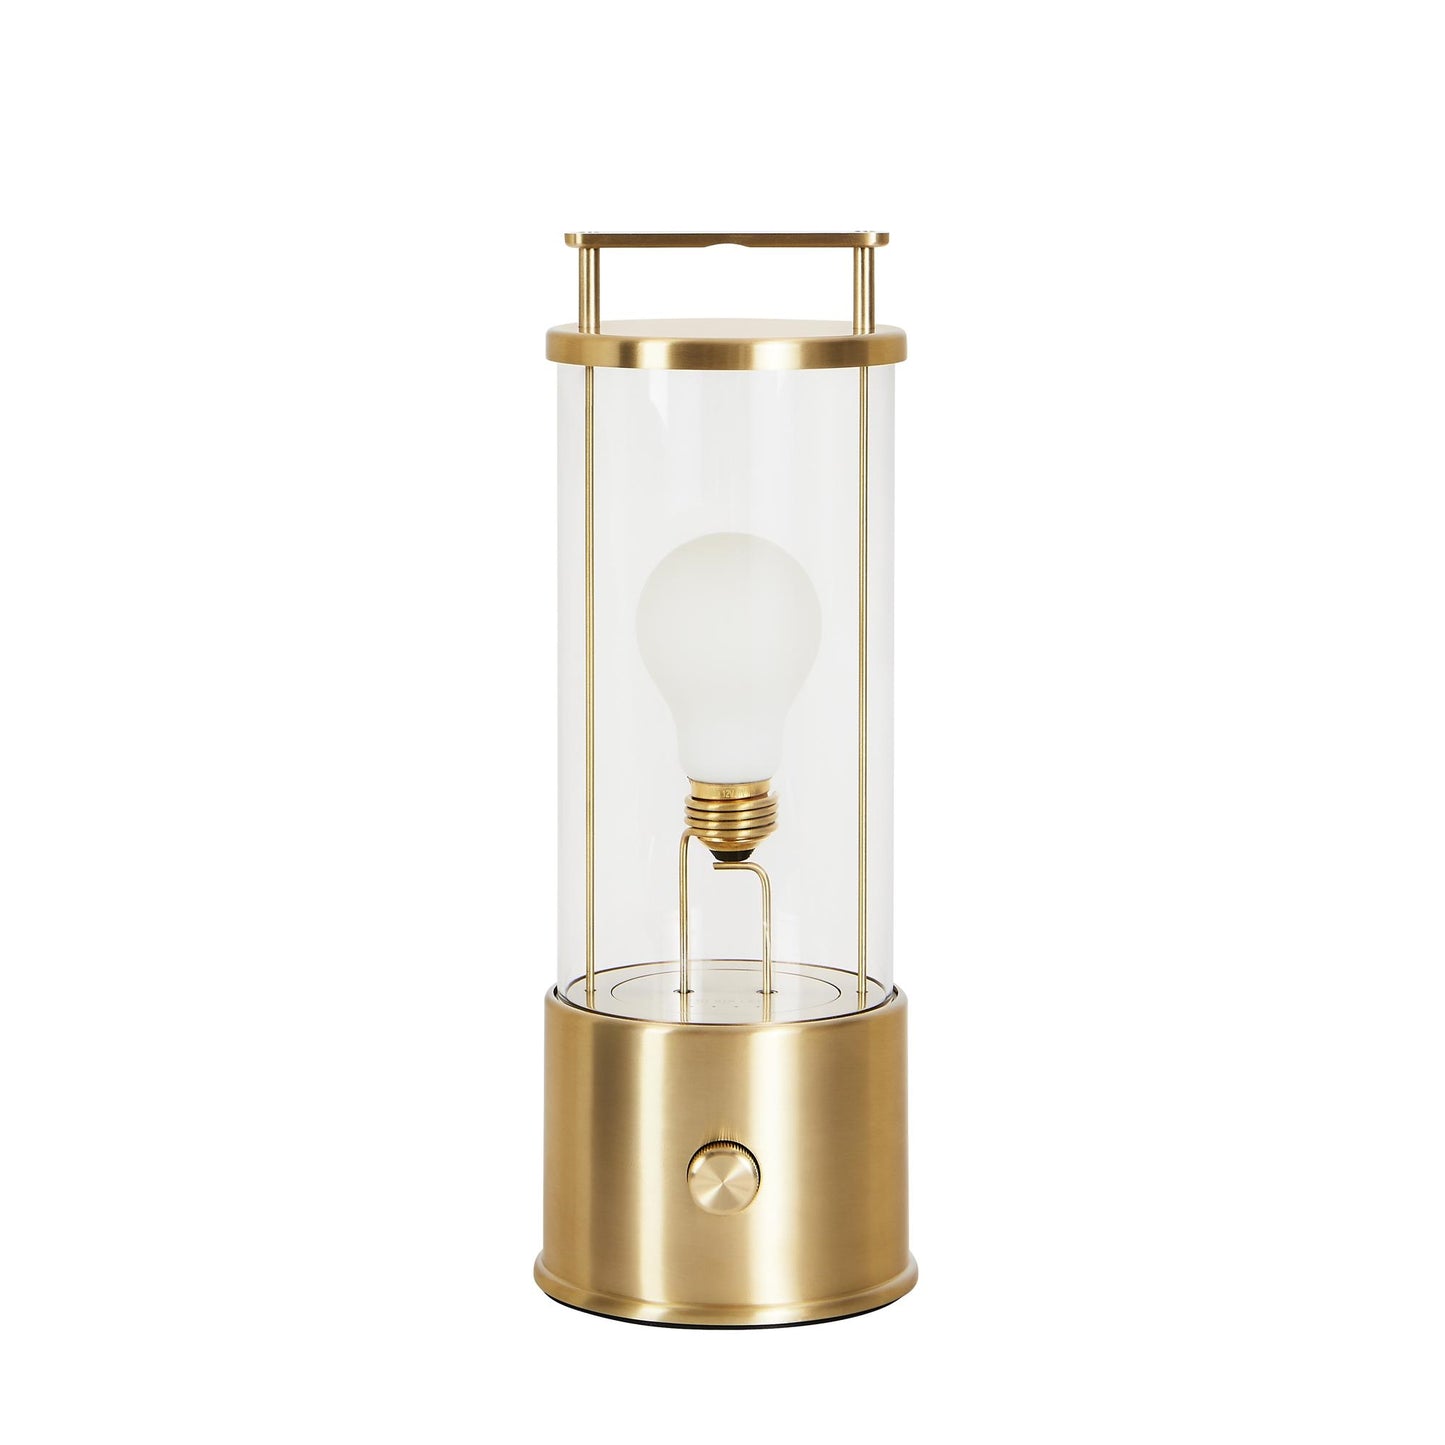 The Muse Portable Lamp by Tala #Solid Brass